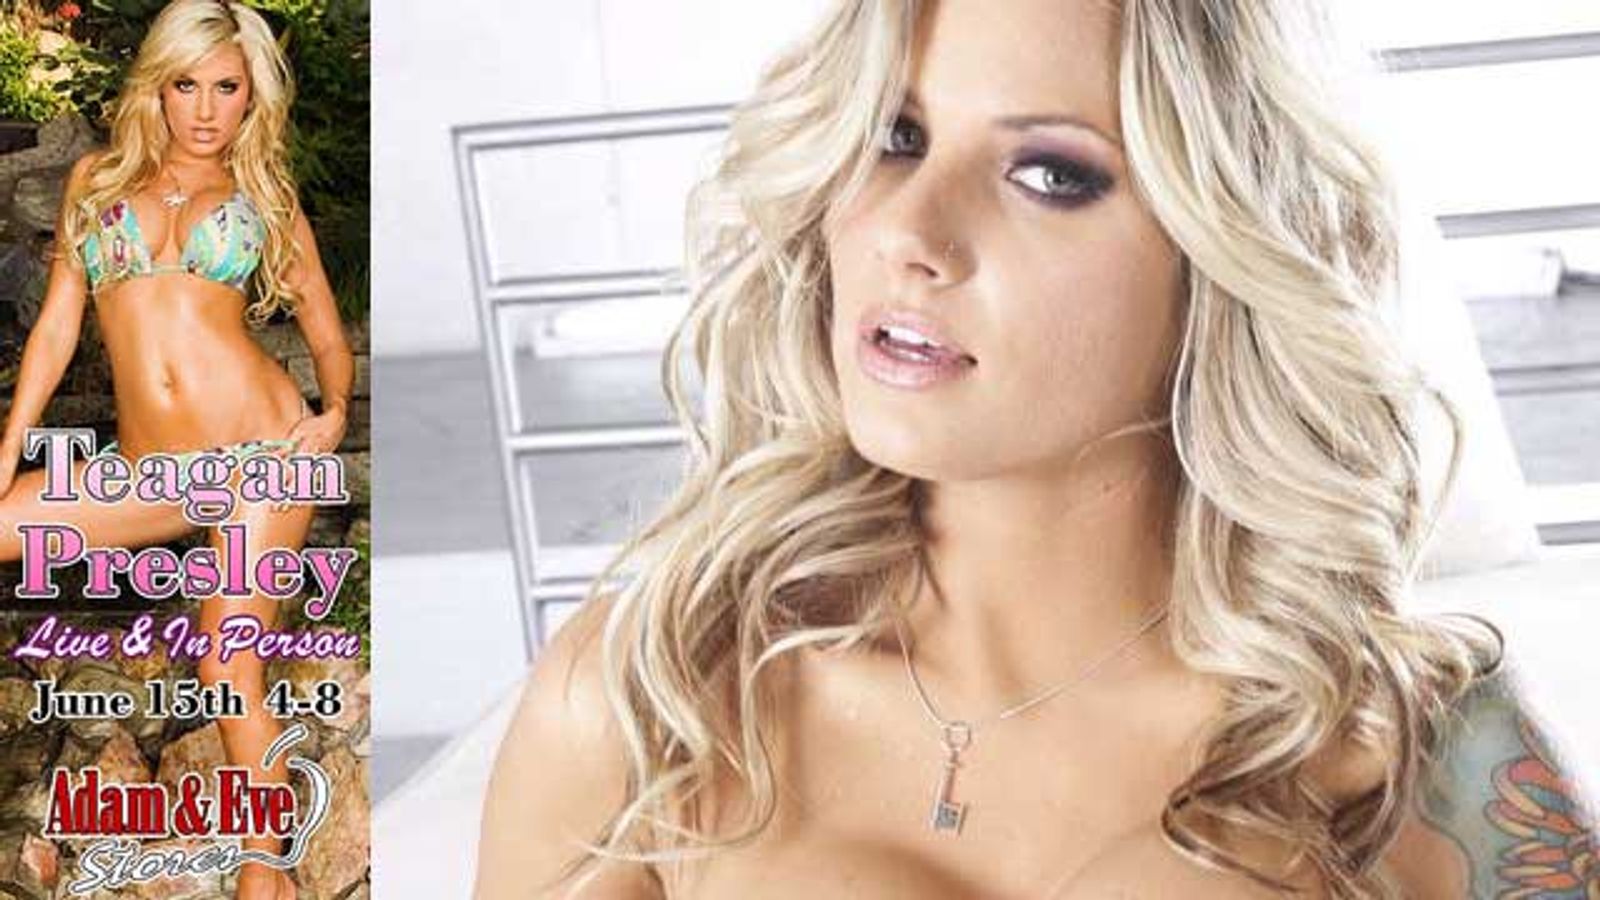 Adam & Eve Contract Star Teagan Presley Heads to Little Rock